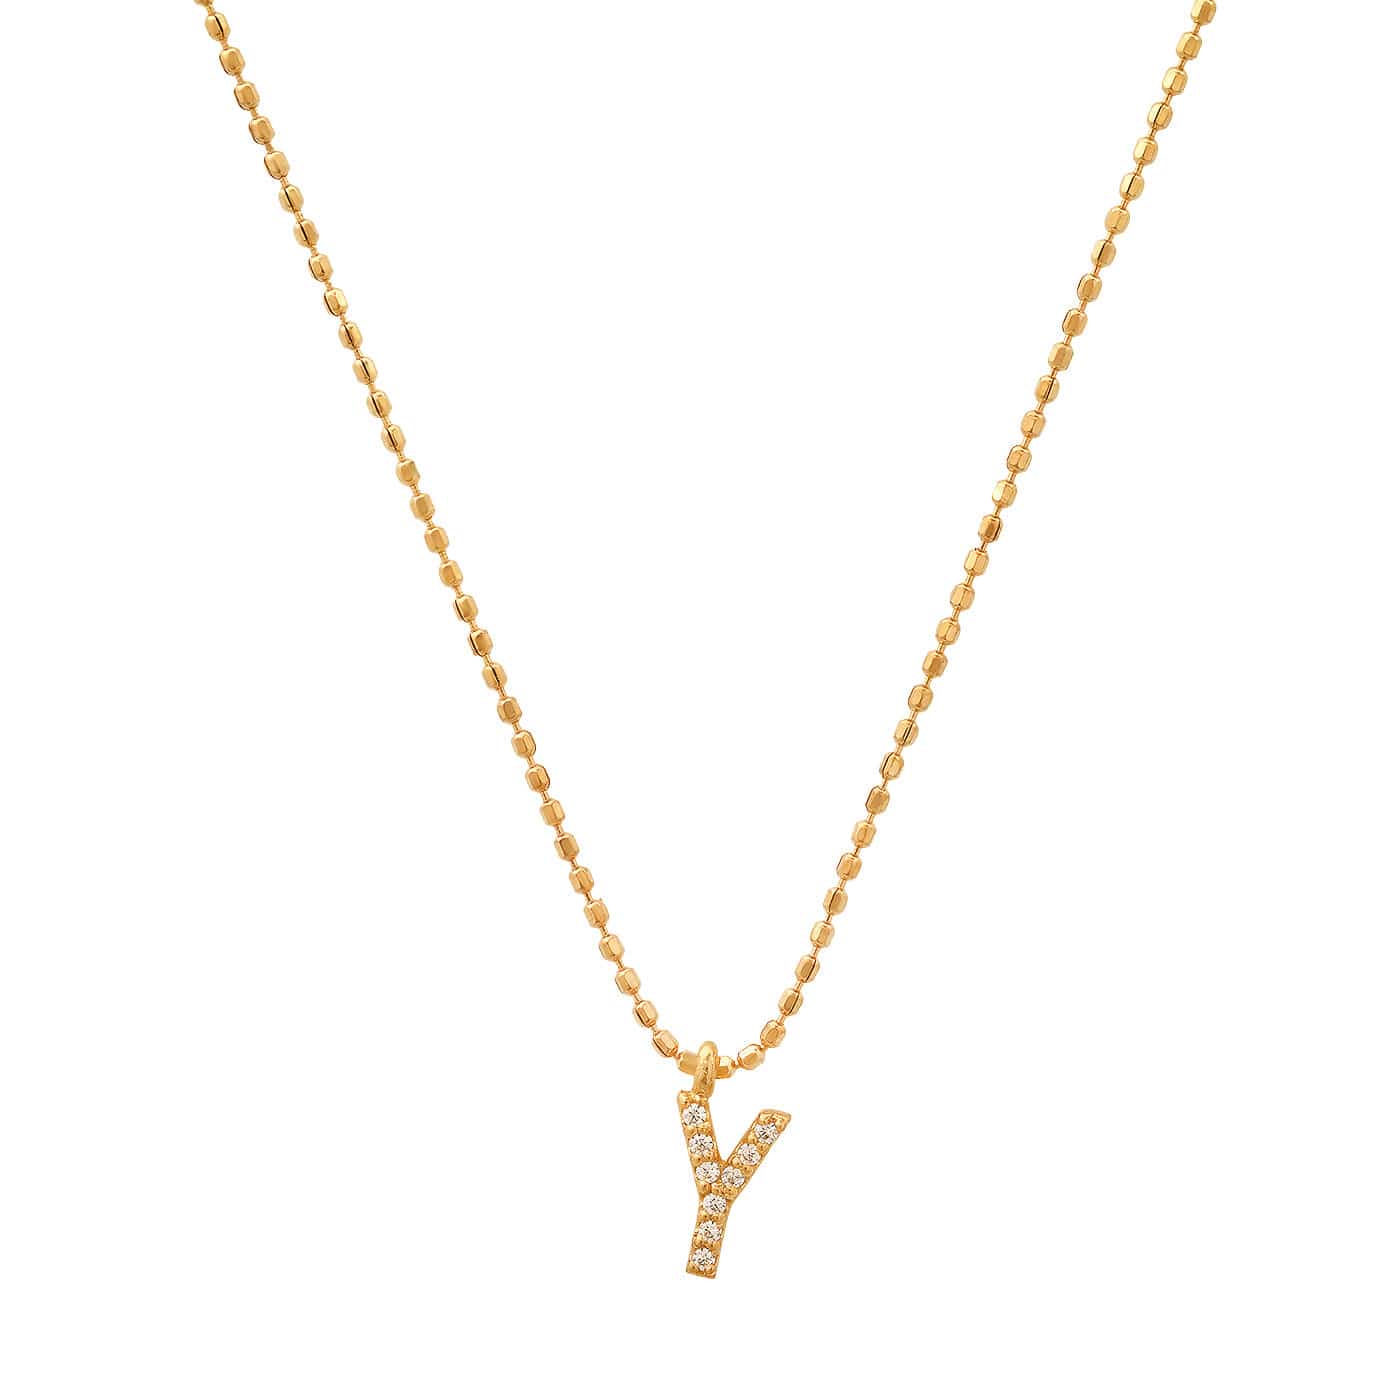 TAI JEWELRY Necklace Y Pave Initial Ball Chain Necklace